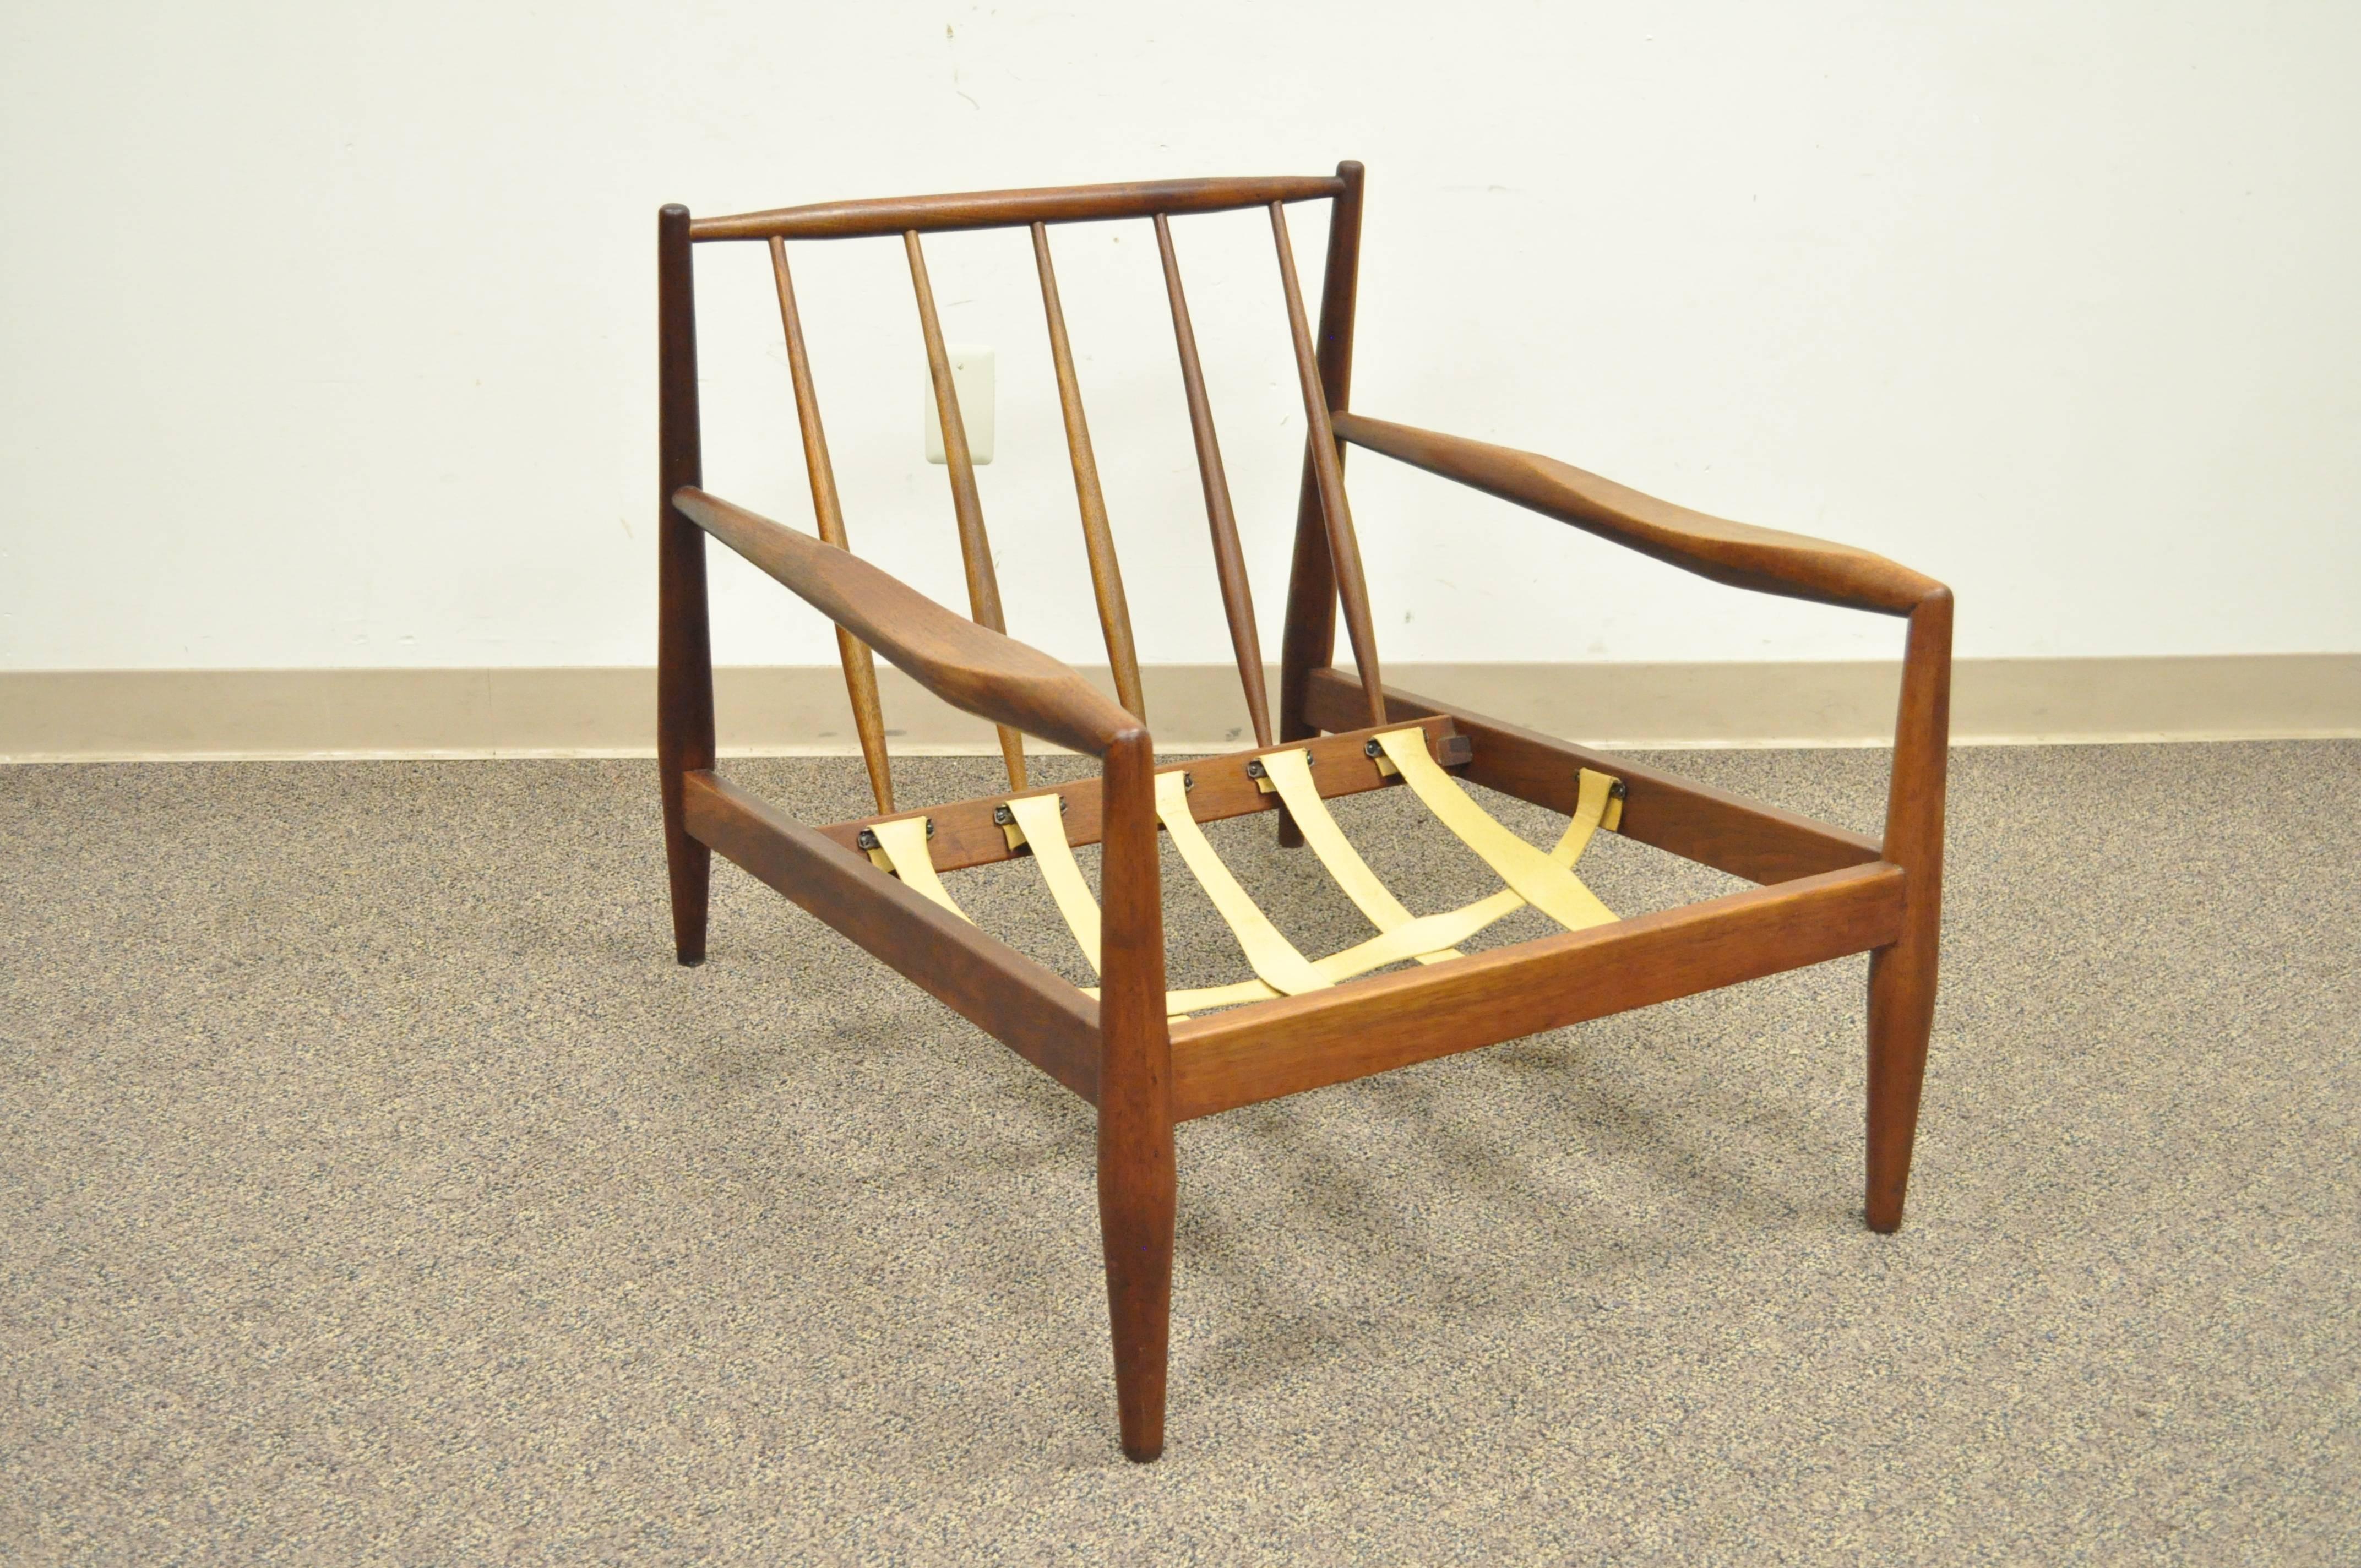 Vintage Adrian Pearsall for Craft Assoc 843-C Mid-Century Modern Walnut lounge chair frame. Item features solid walnut construction, great sculptural form, and sleek lines.